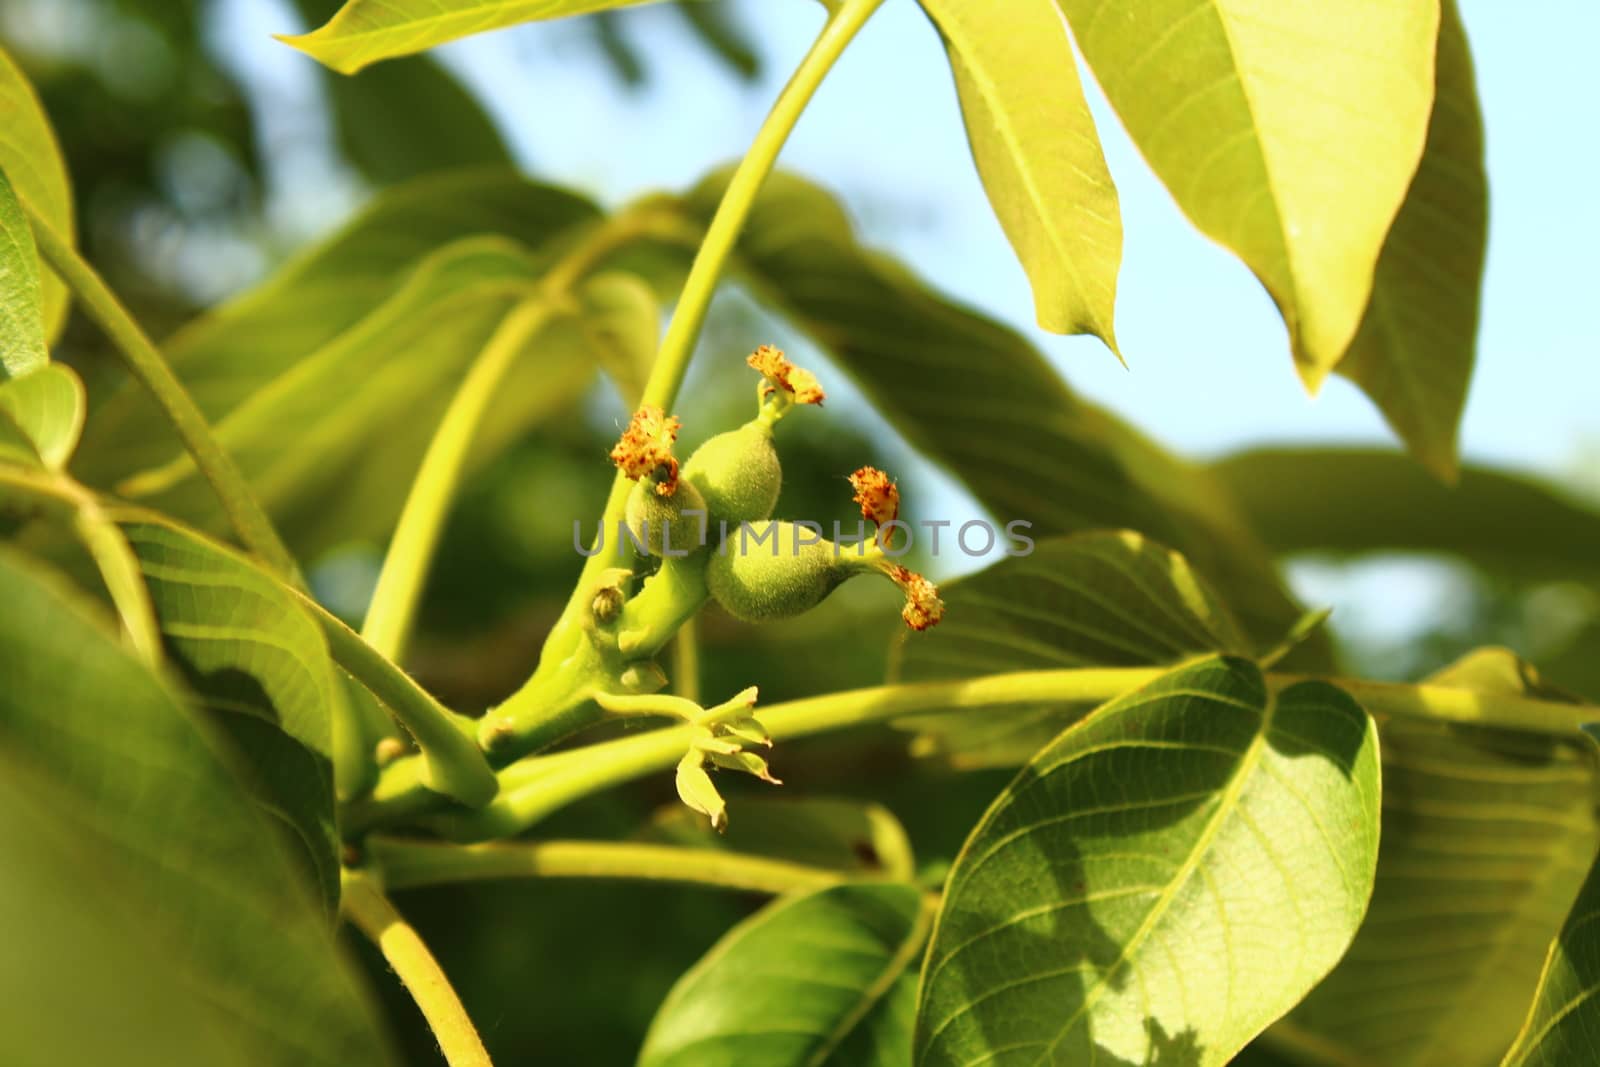 The picture shows little walnuts on the walnut tree.